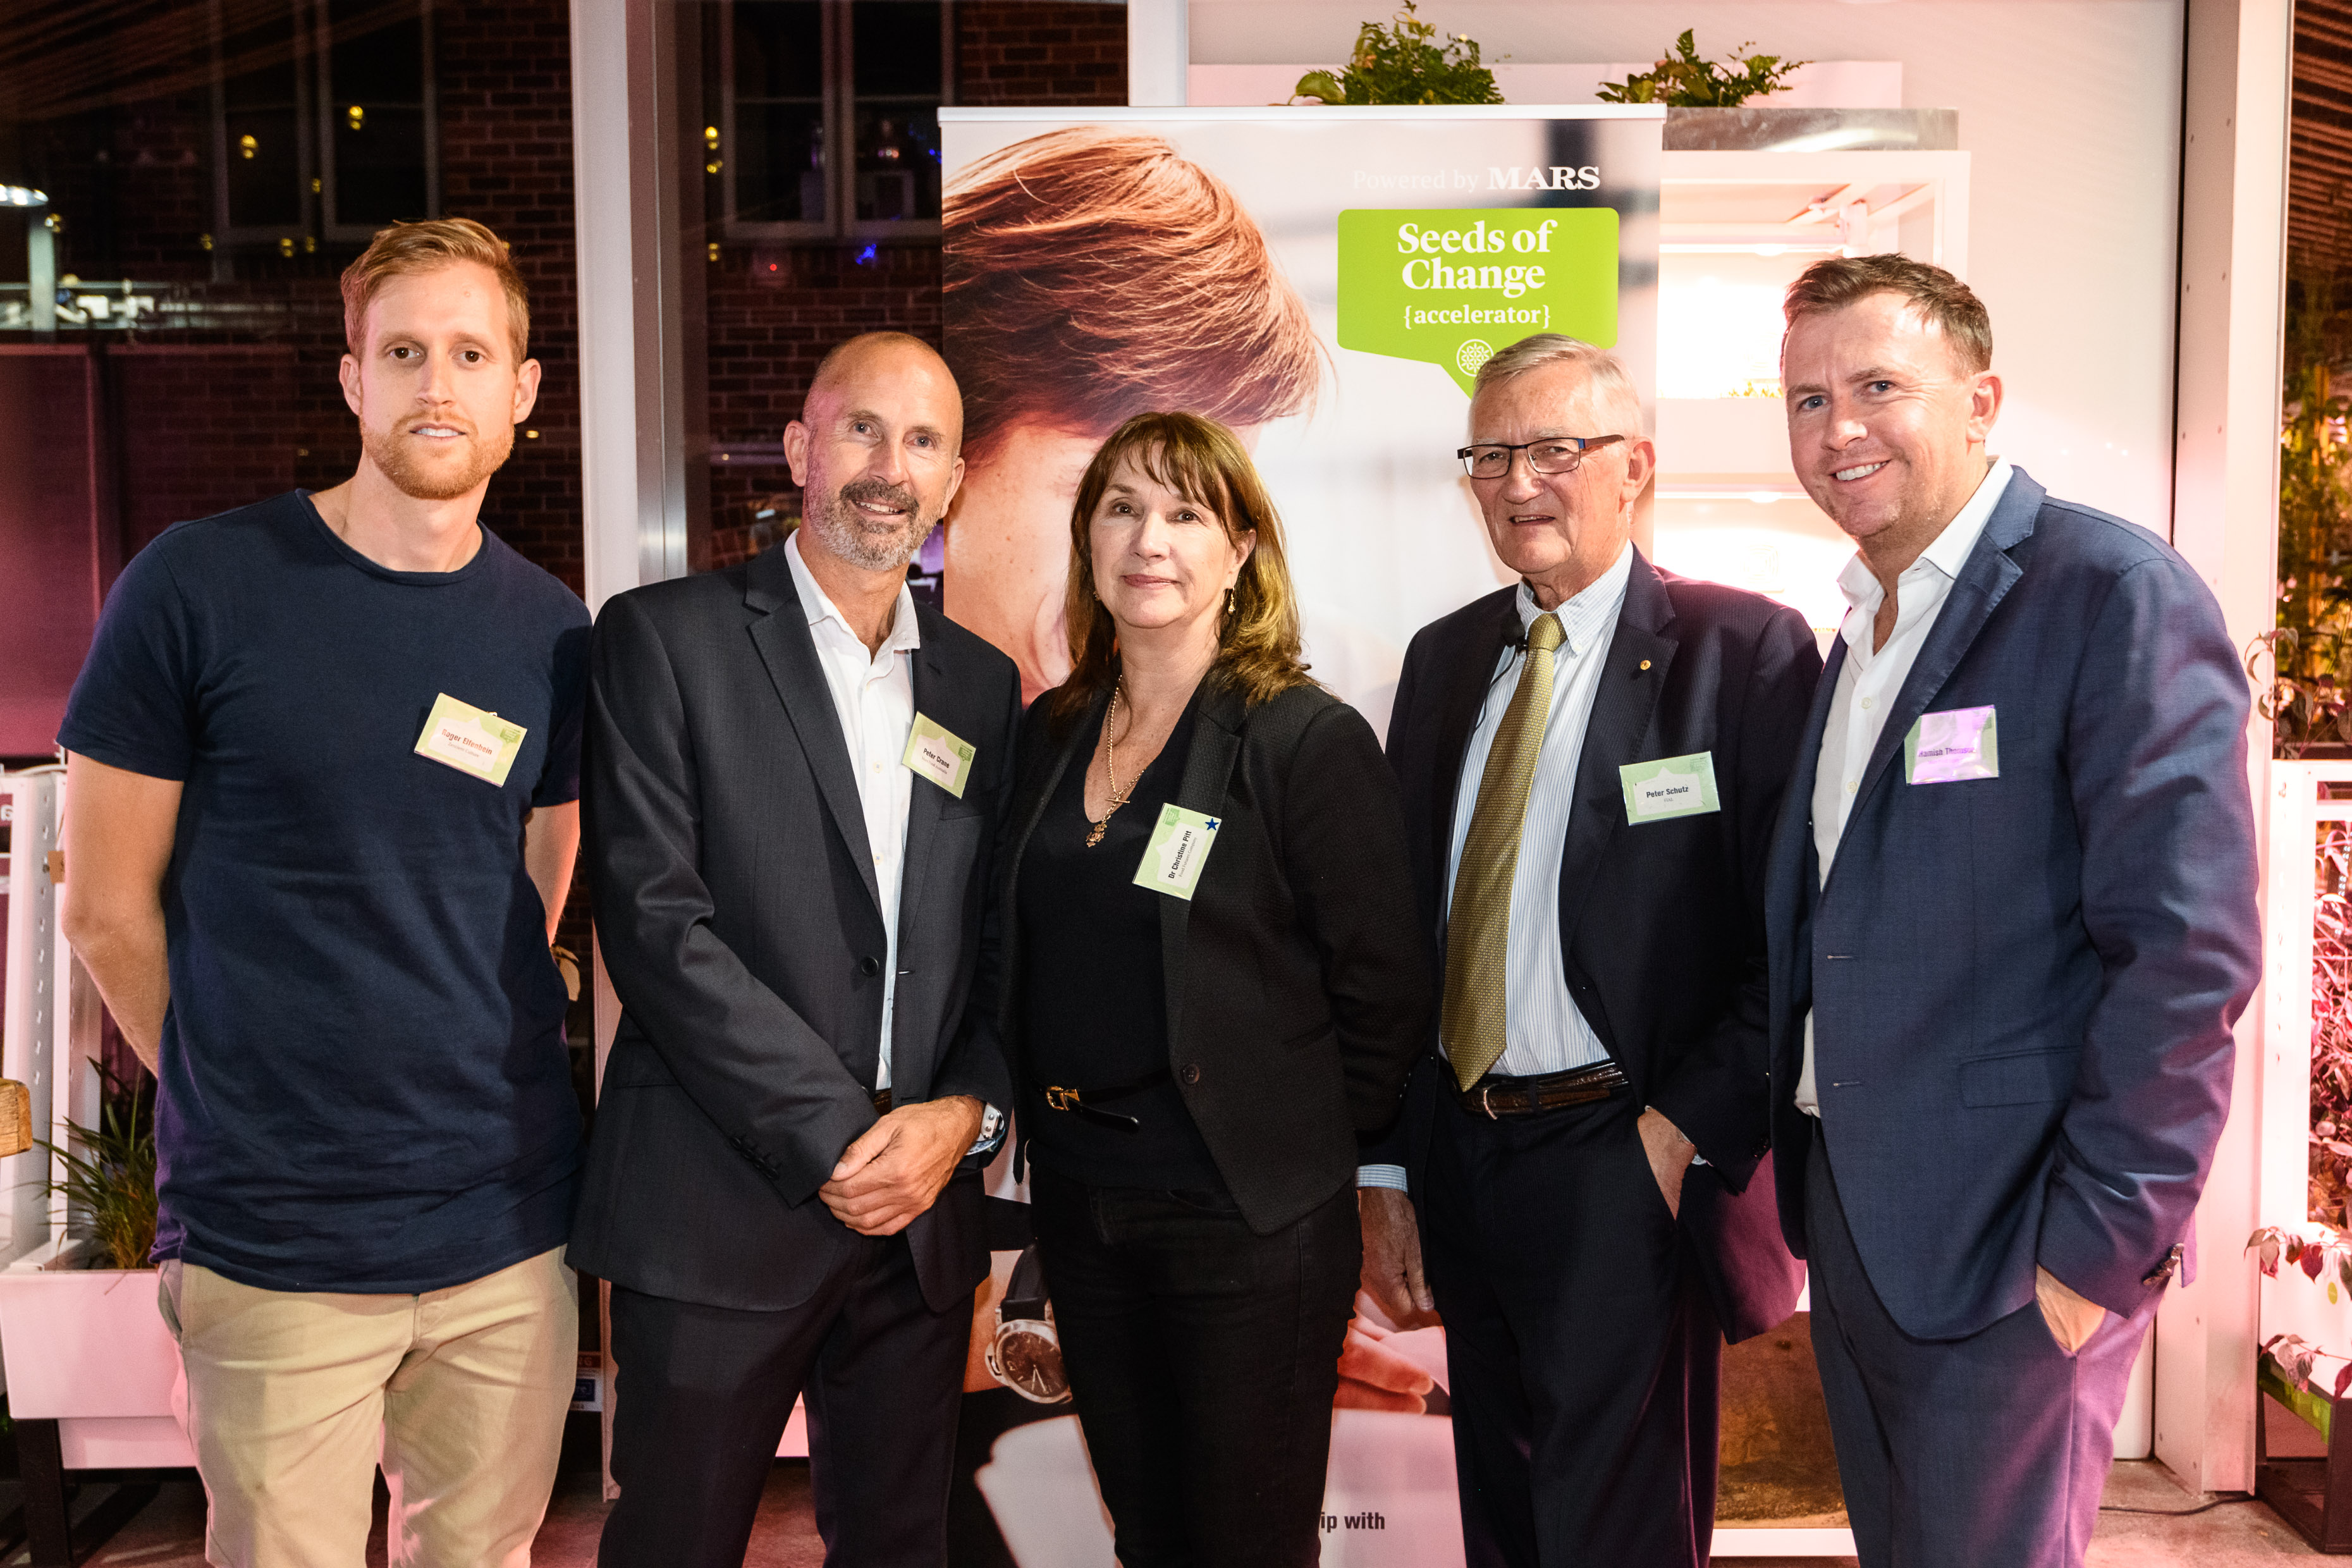 Roger Elfenbein, Founder and Managing Director at Zentient Culture; Peter Crane, R&D Director, Mars Food Australia; Dr Christine Pitt, CEO, Food Futures Company; Peter Schutz, Chairman, FIAL; and Hamish Thomson, General Manager, Mars Food Australia.  